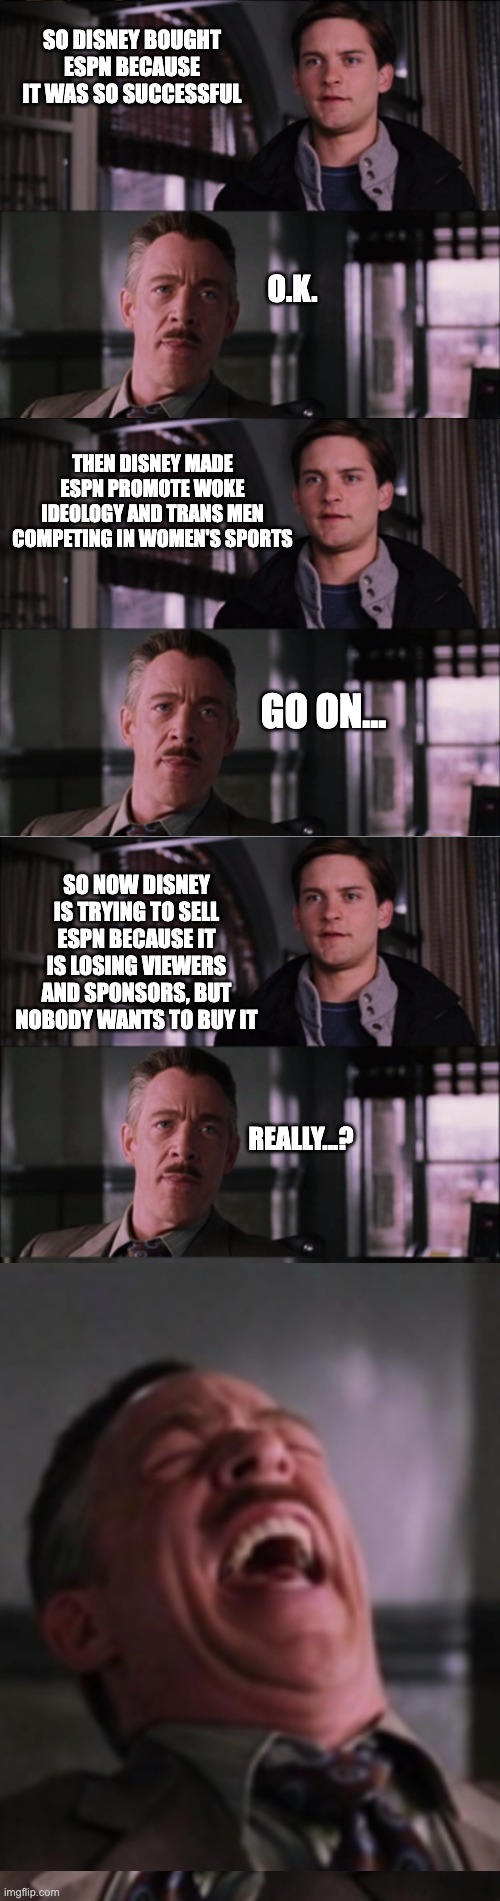 SO DISNEY BOUGHT ESPN BECAUSE IT WAS SO SUCCESSFUL; O.K. THEN DISNEY MADE ESPN PROMOTE WOKE IDEOLOGY AND TRANS MEN COMPETING IN WOMEN'S SPORTS; GO ON... SO NOW DISNEY IS TRYING TO SELL ESPN BECAUSE IT IS LOSING VIEWERS AND SPONSORS, BUT NOBODY WANTS TO BUY IT; REALLY...? | image tagged in woke idiots | made w/ Imgflip meme maker